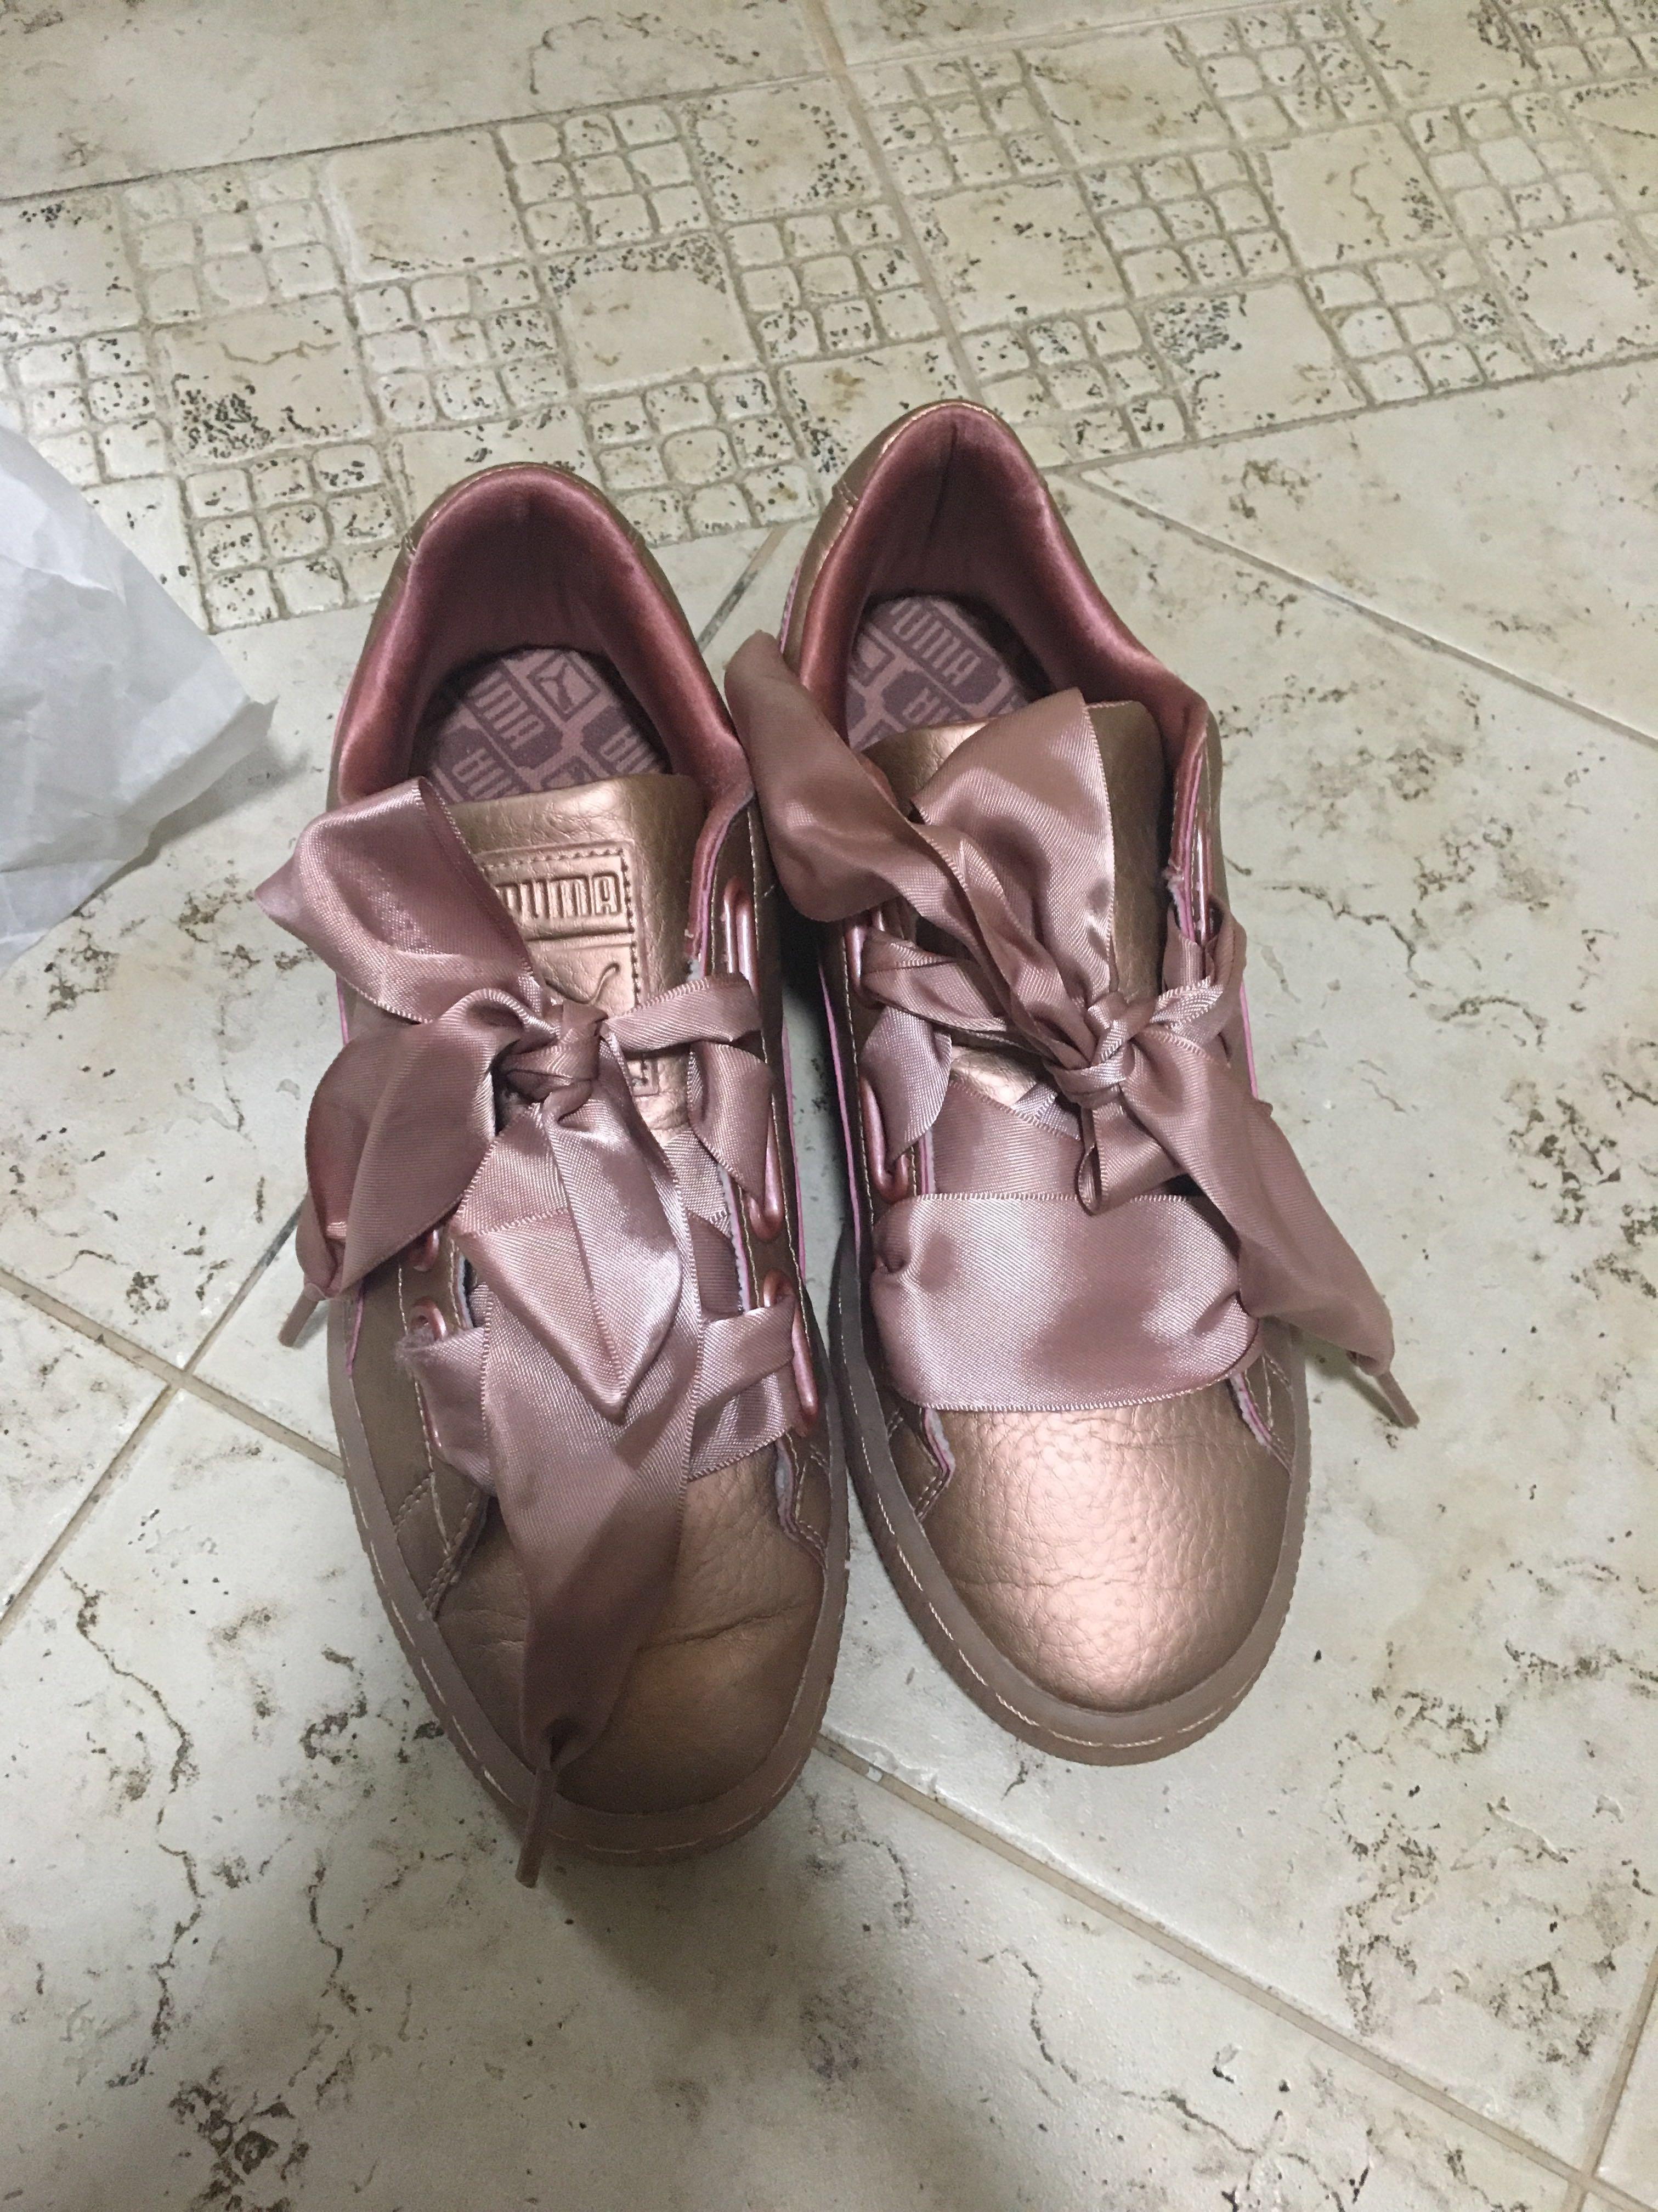 puma pink and gold shoes